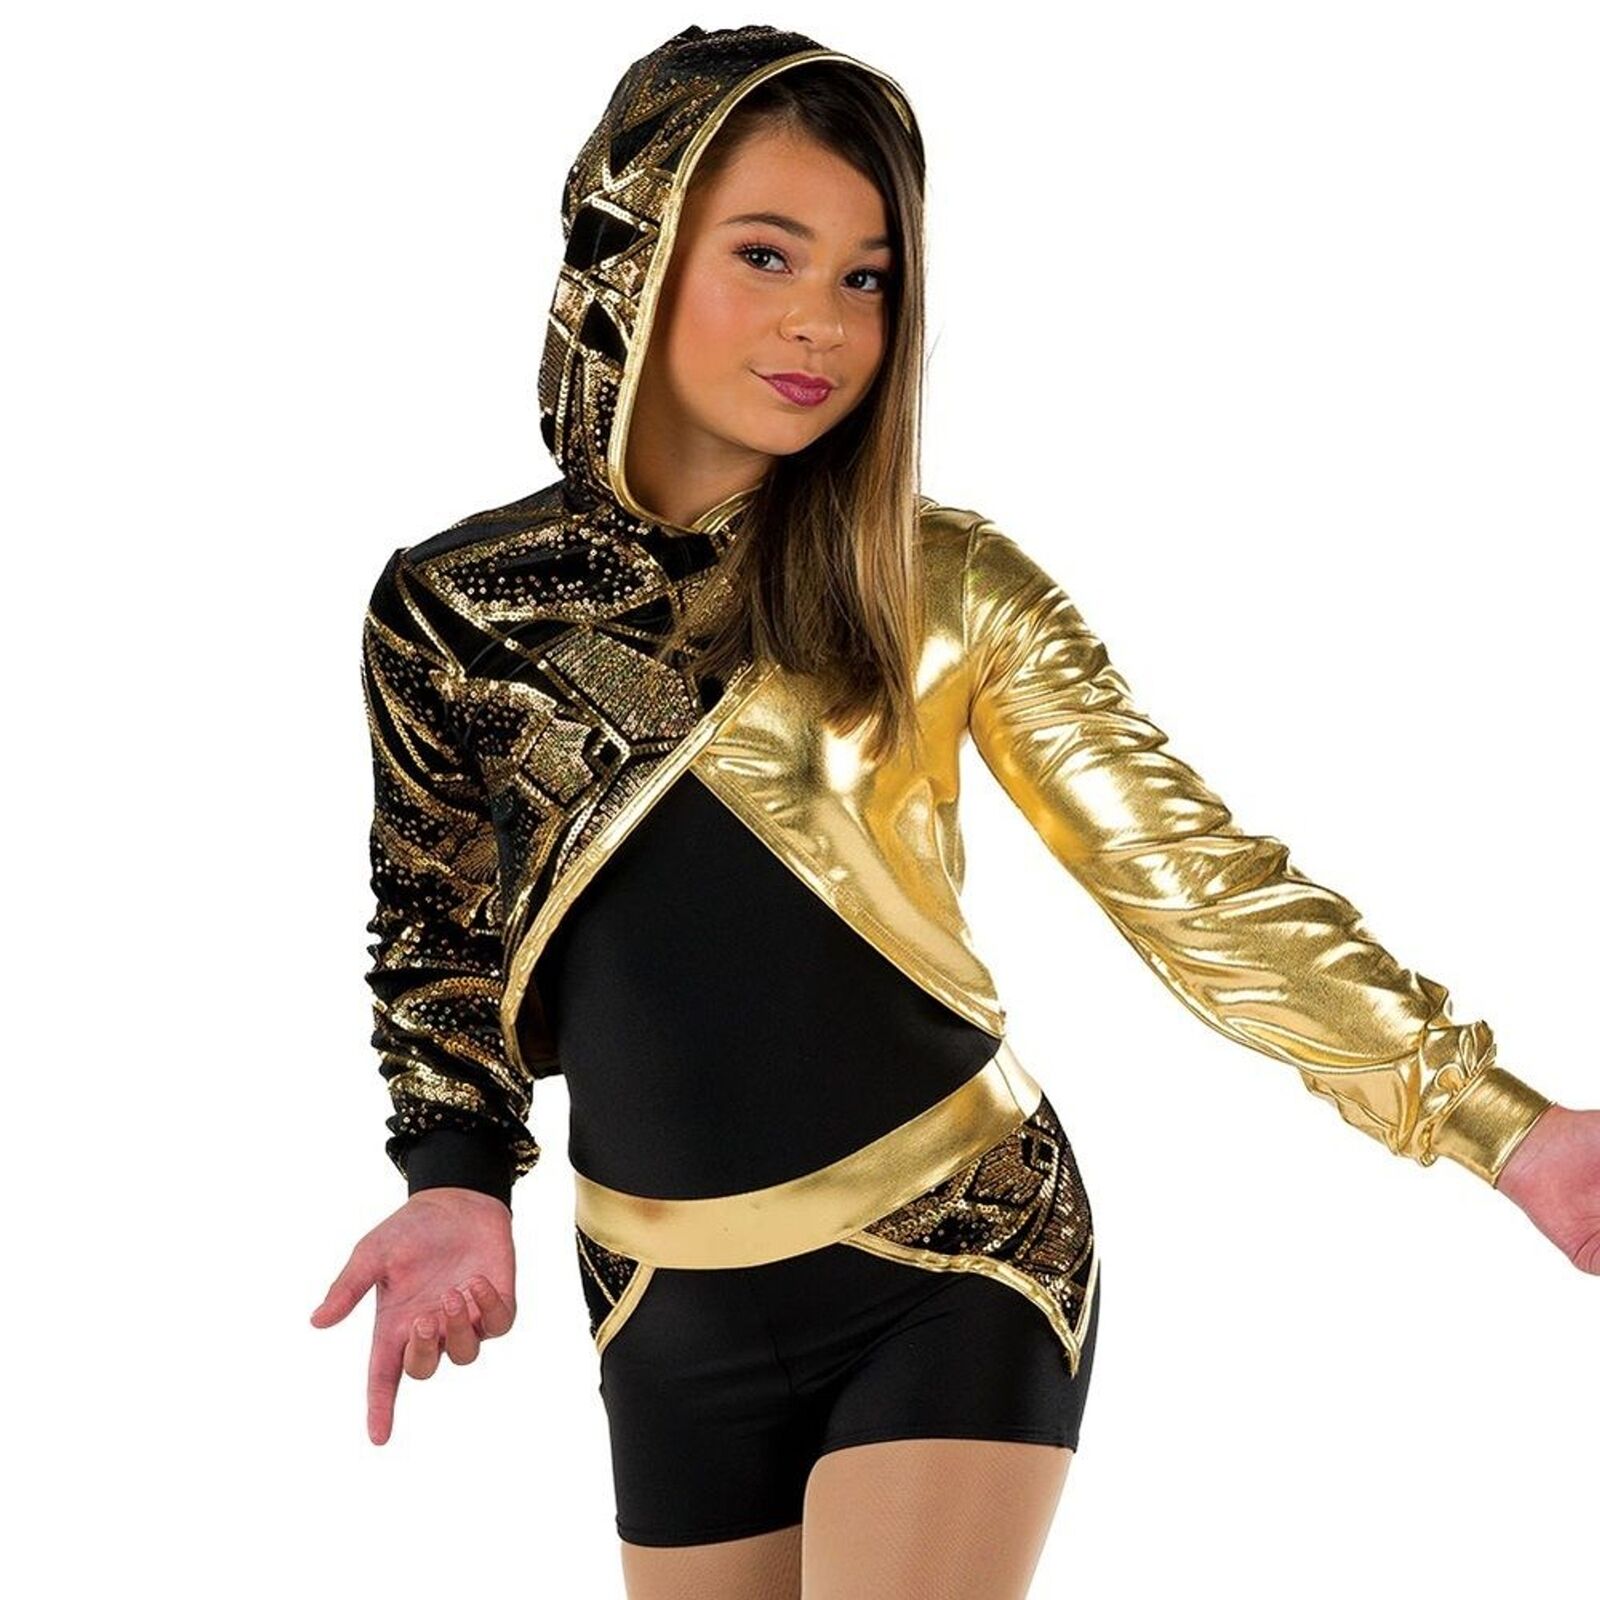 Foil Hip-Hop Gold and Black You’re An Allstar Dance Costume Size ISC (7/8)